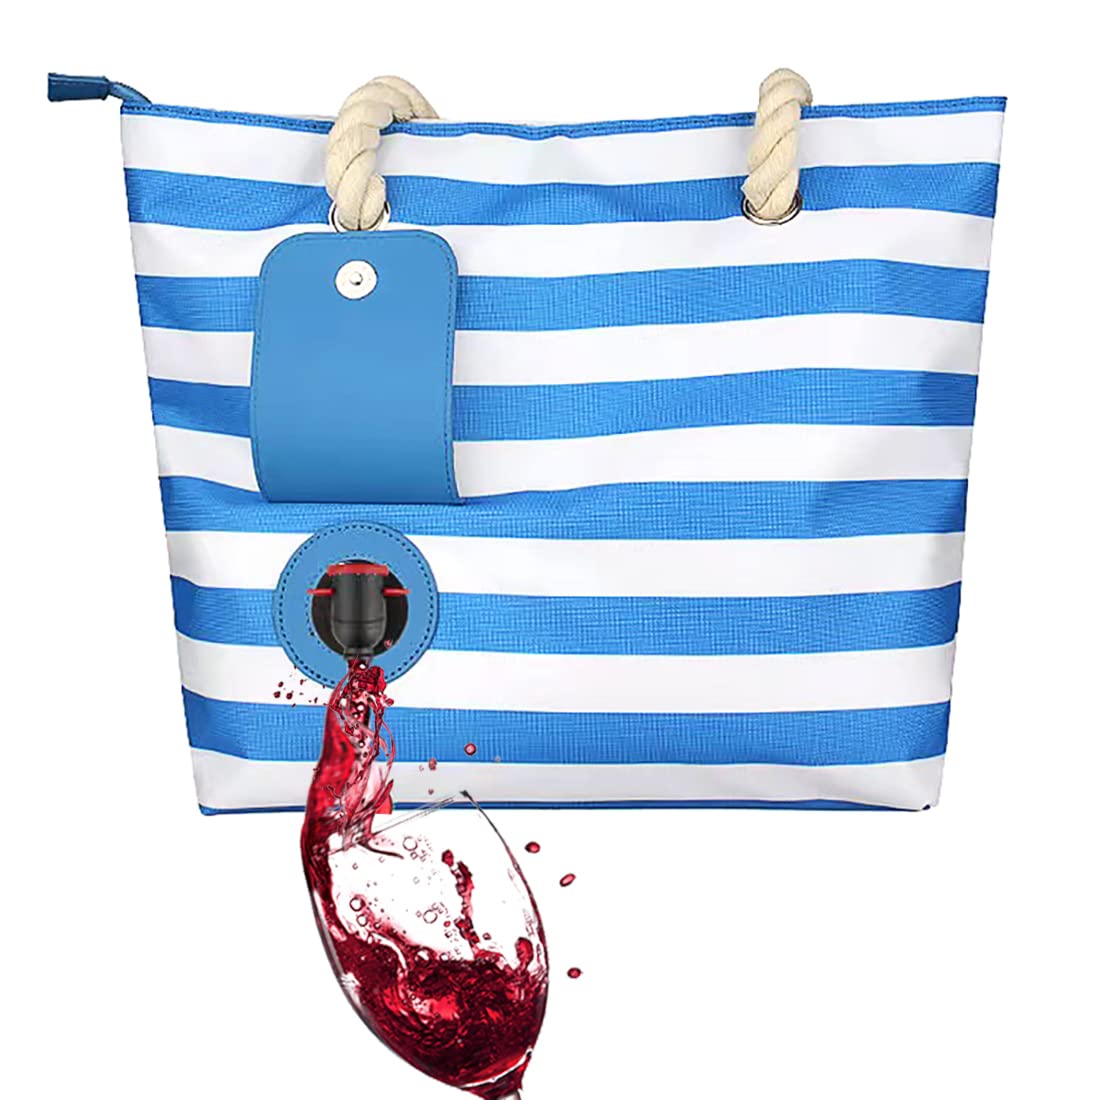 Beach Wine Tote Bag Wine Cooler Bag Leakproof Insulated Purse Carrier with Spout Hidden Compartments Holds 2 Bottles of Wine for Travel Estauran Party Dinner